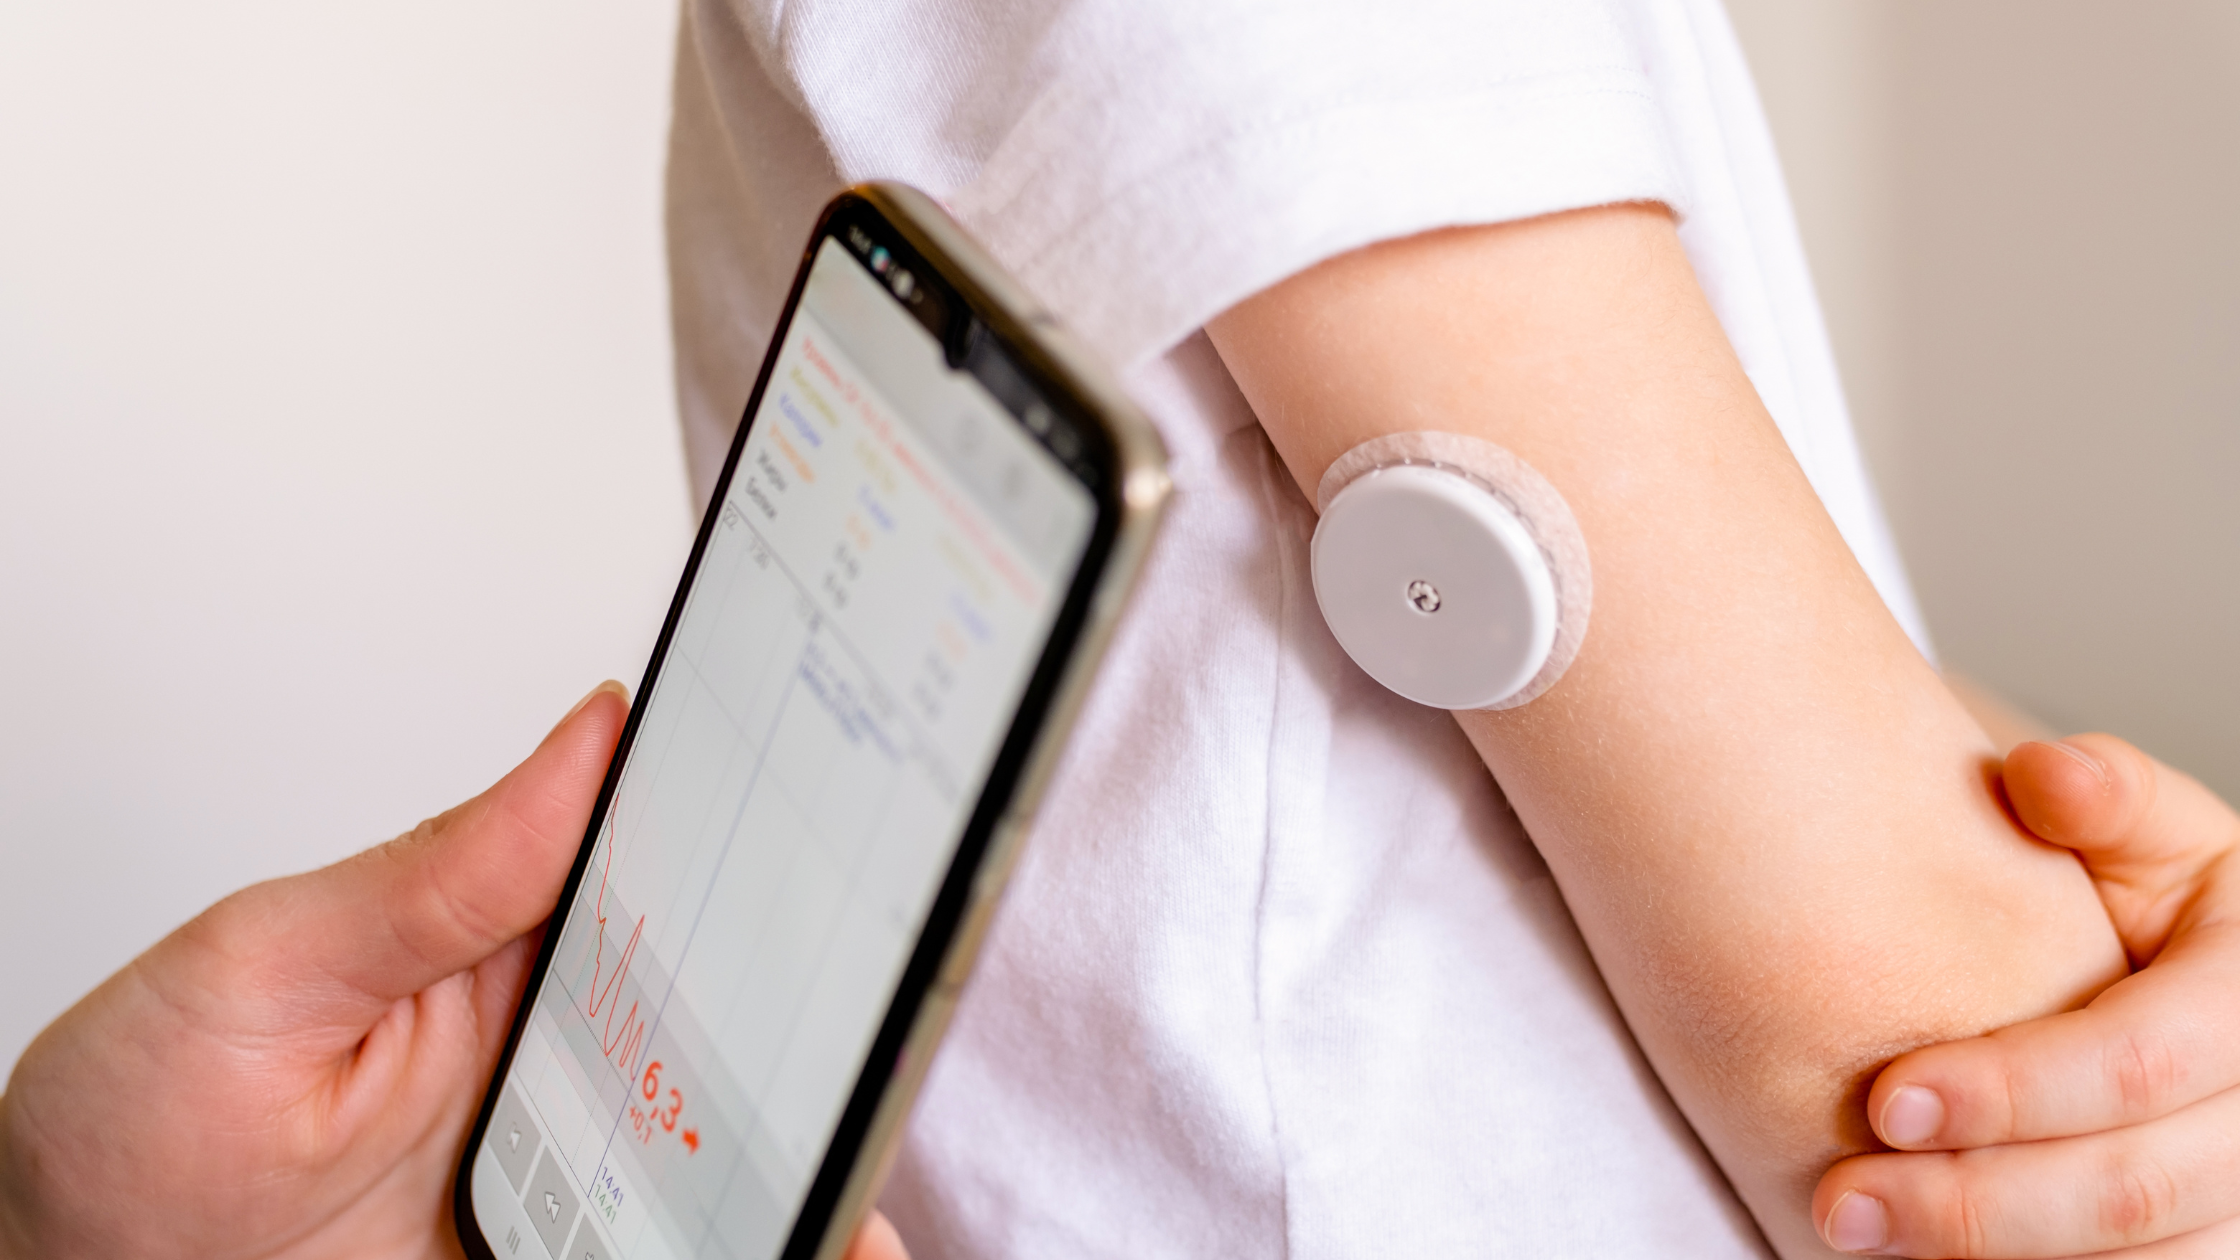 updating glucose levels data from CGM with smartphone app